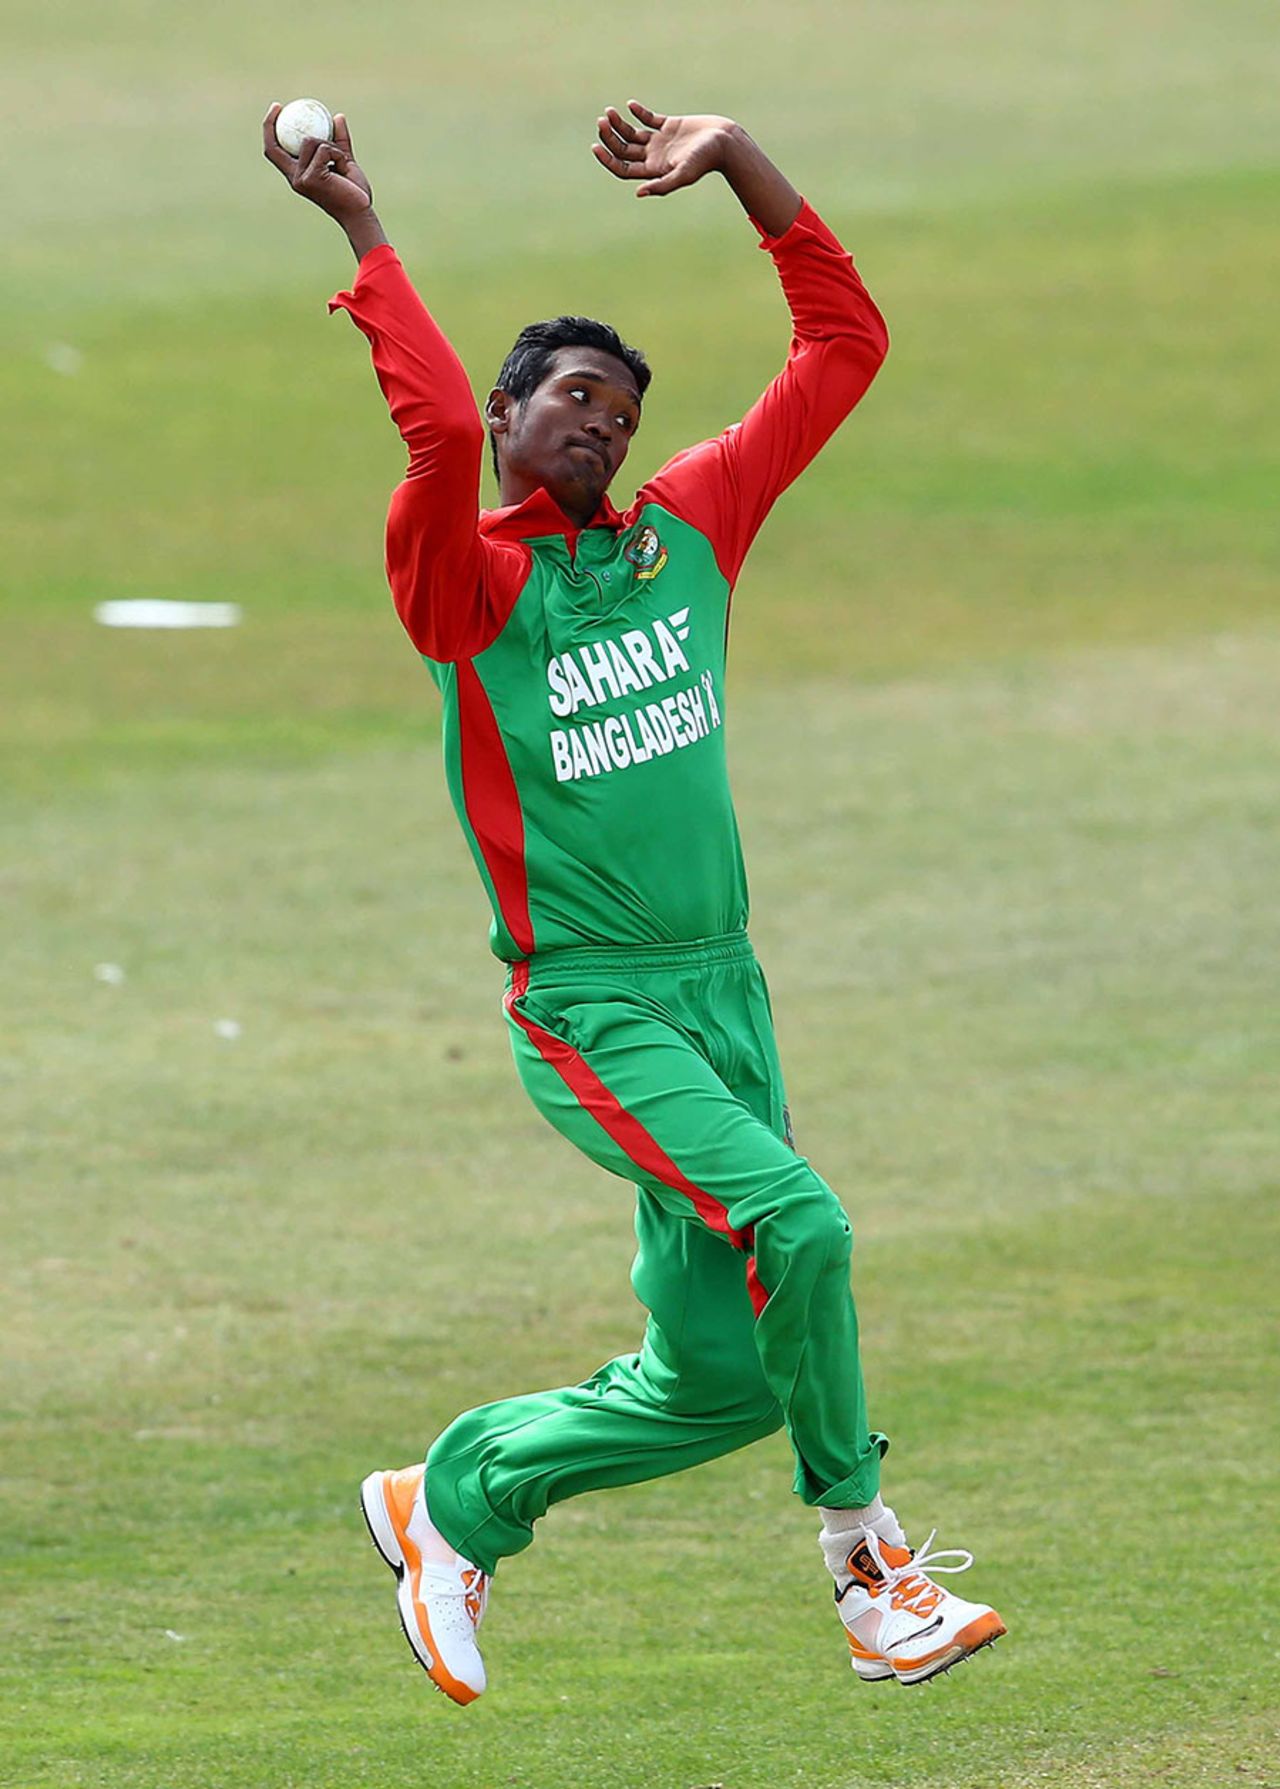 Al-Amin Hossain leaps into his delivery stride, England Lions v Bangladesh A, 3rd unofficial ODI, Taunton, August 24, 2013